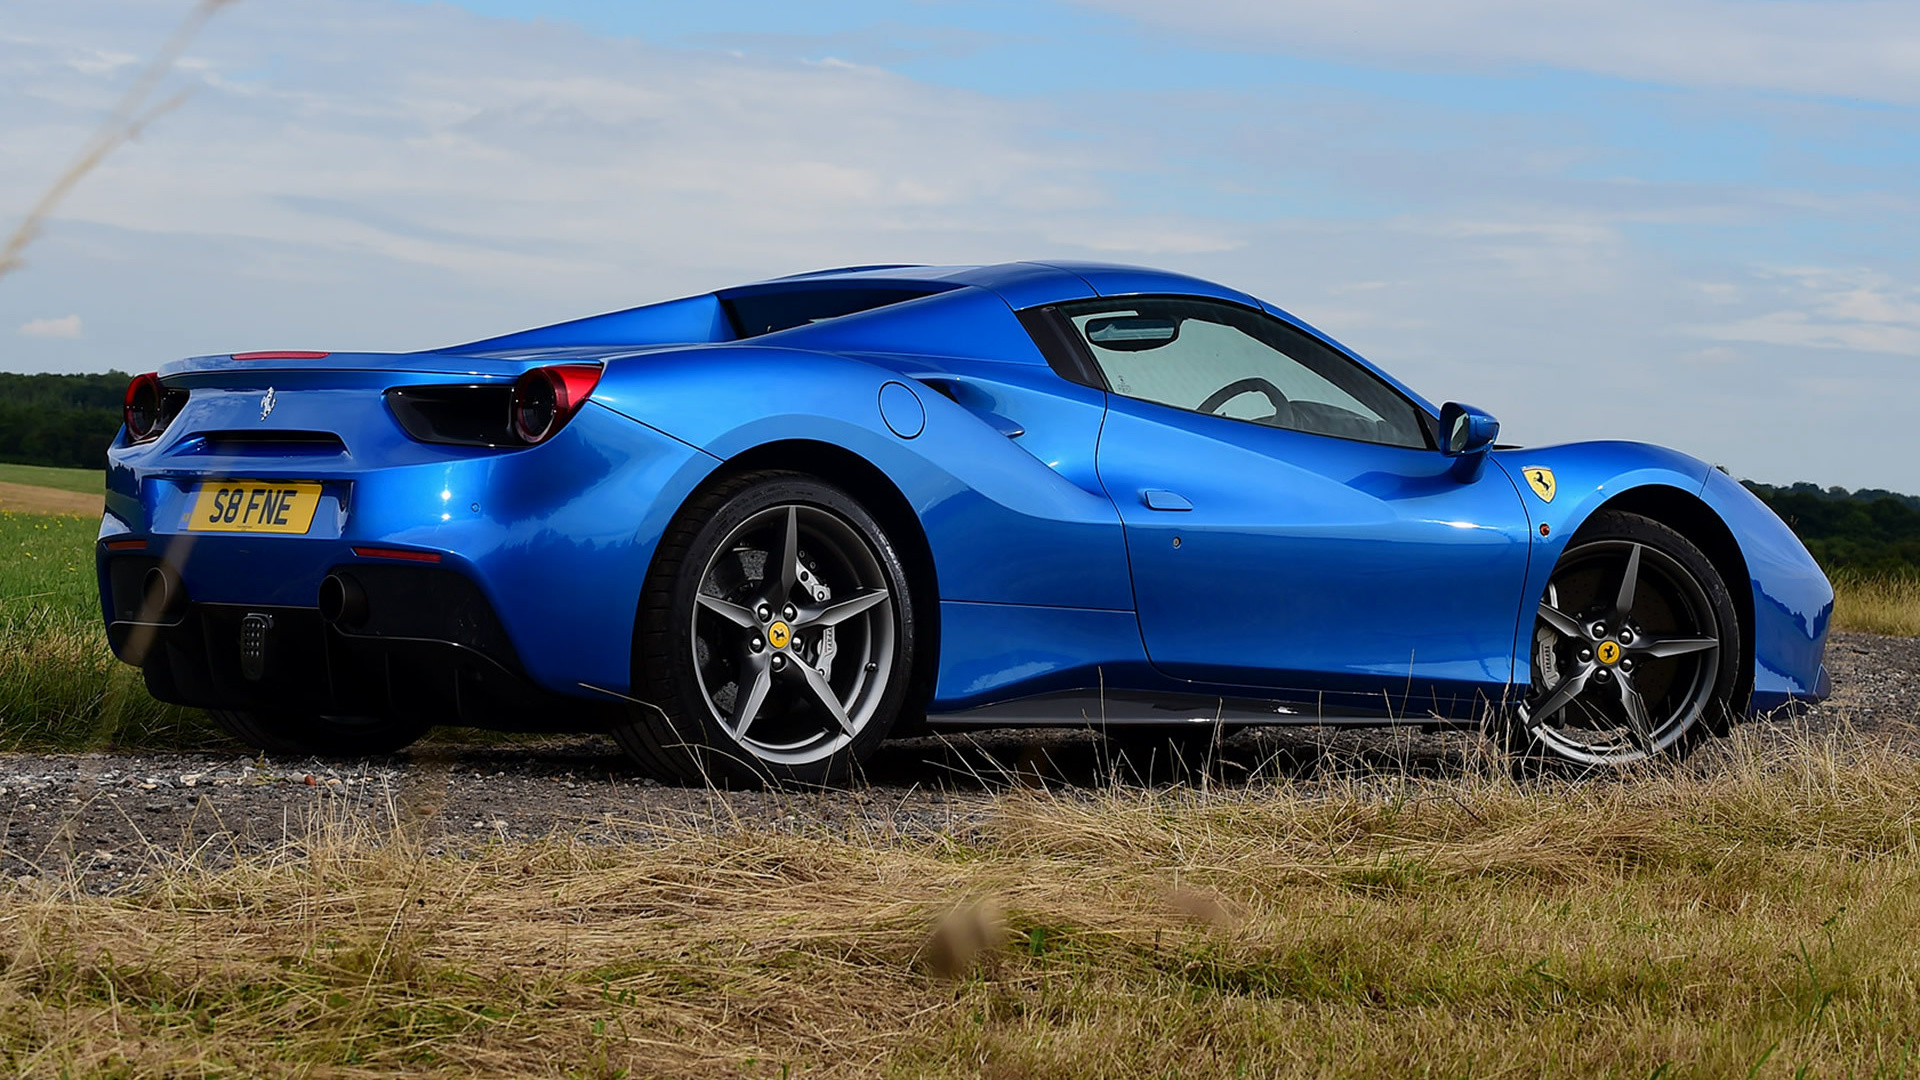 Ferrari 488 Spider (2016) UK Wallpapers and HD Images ...